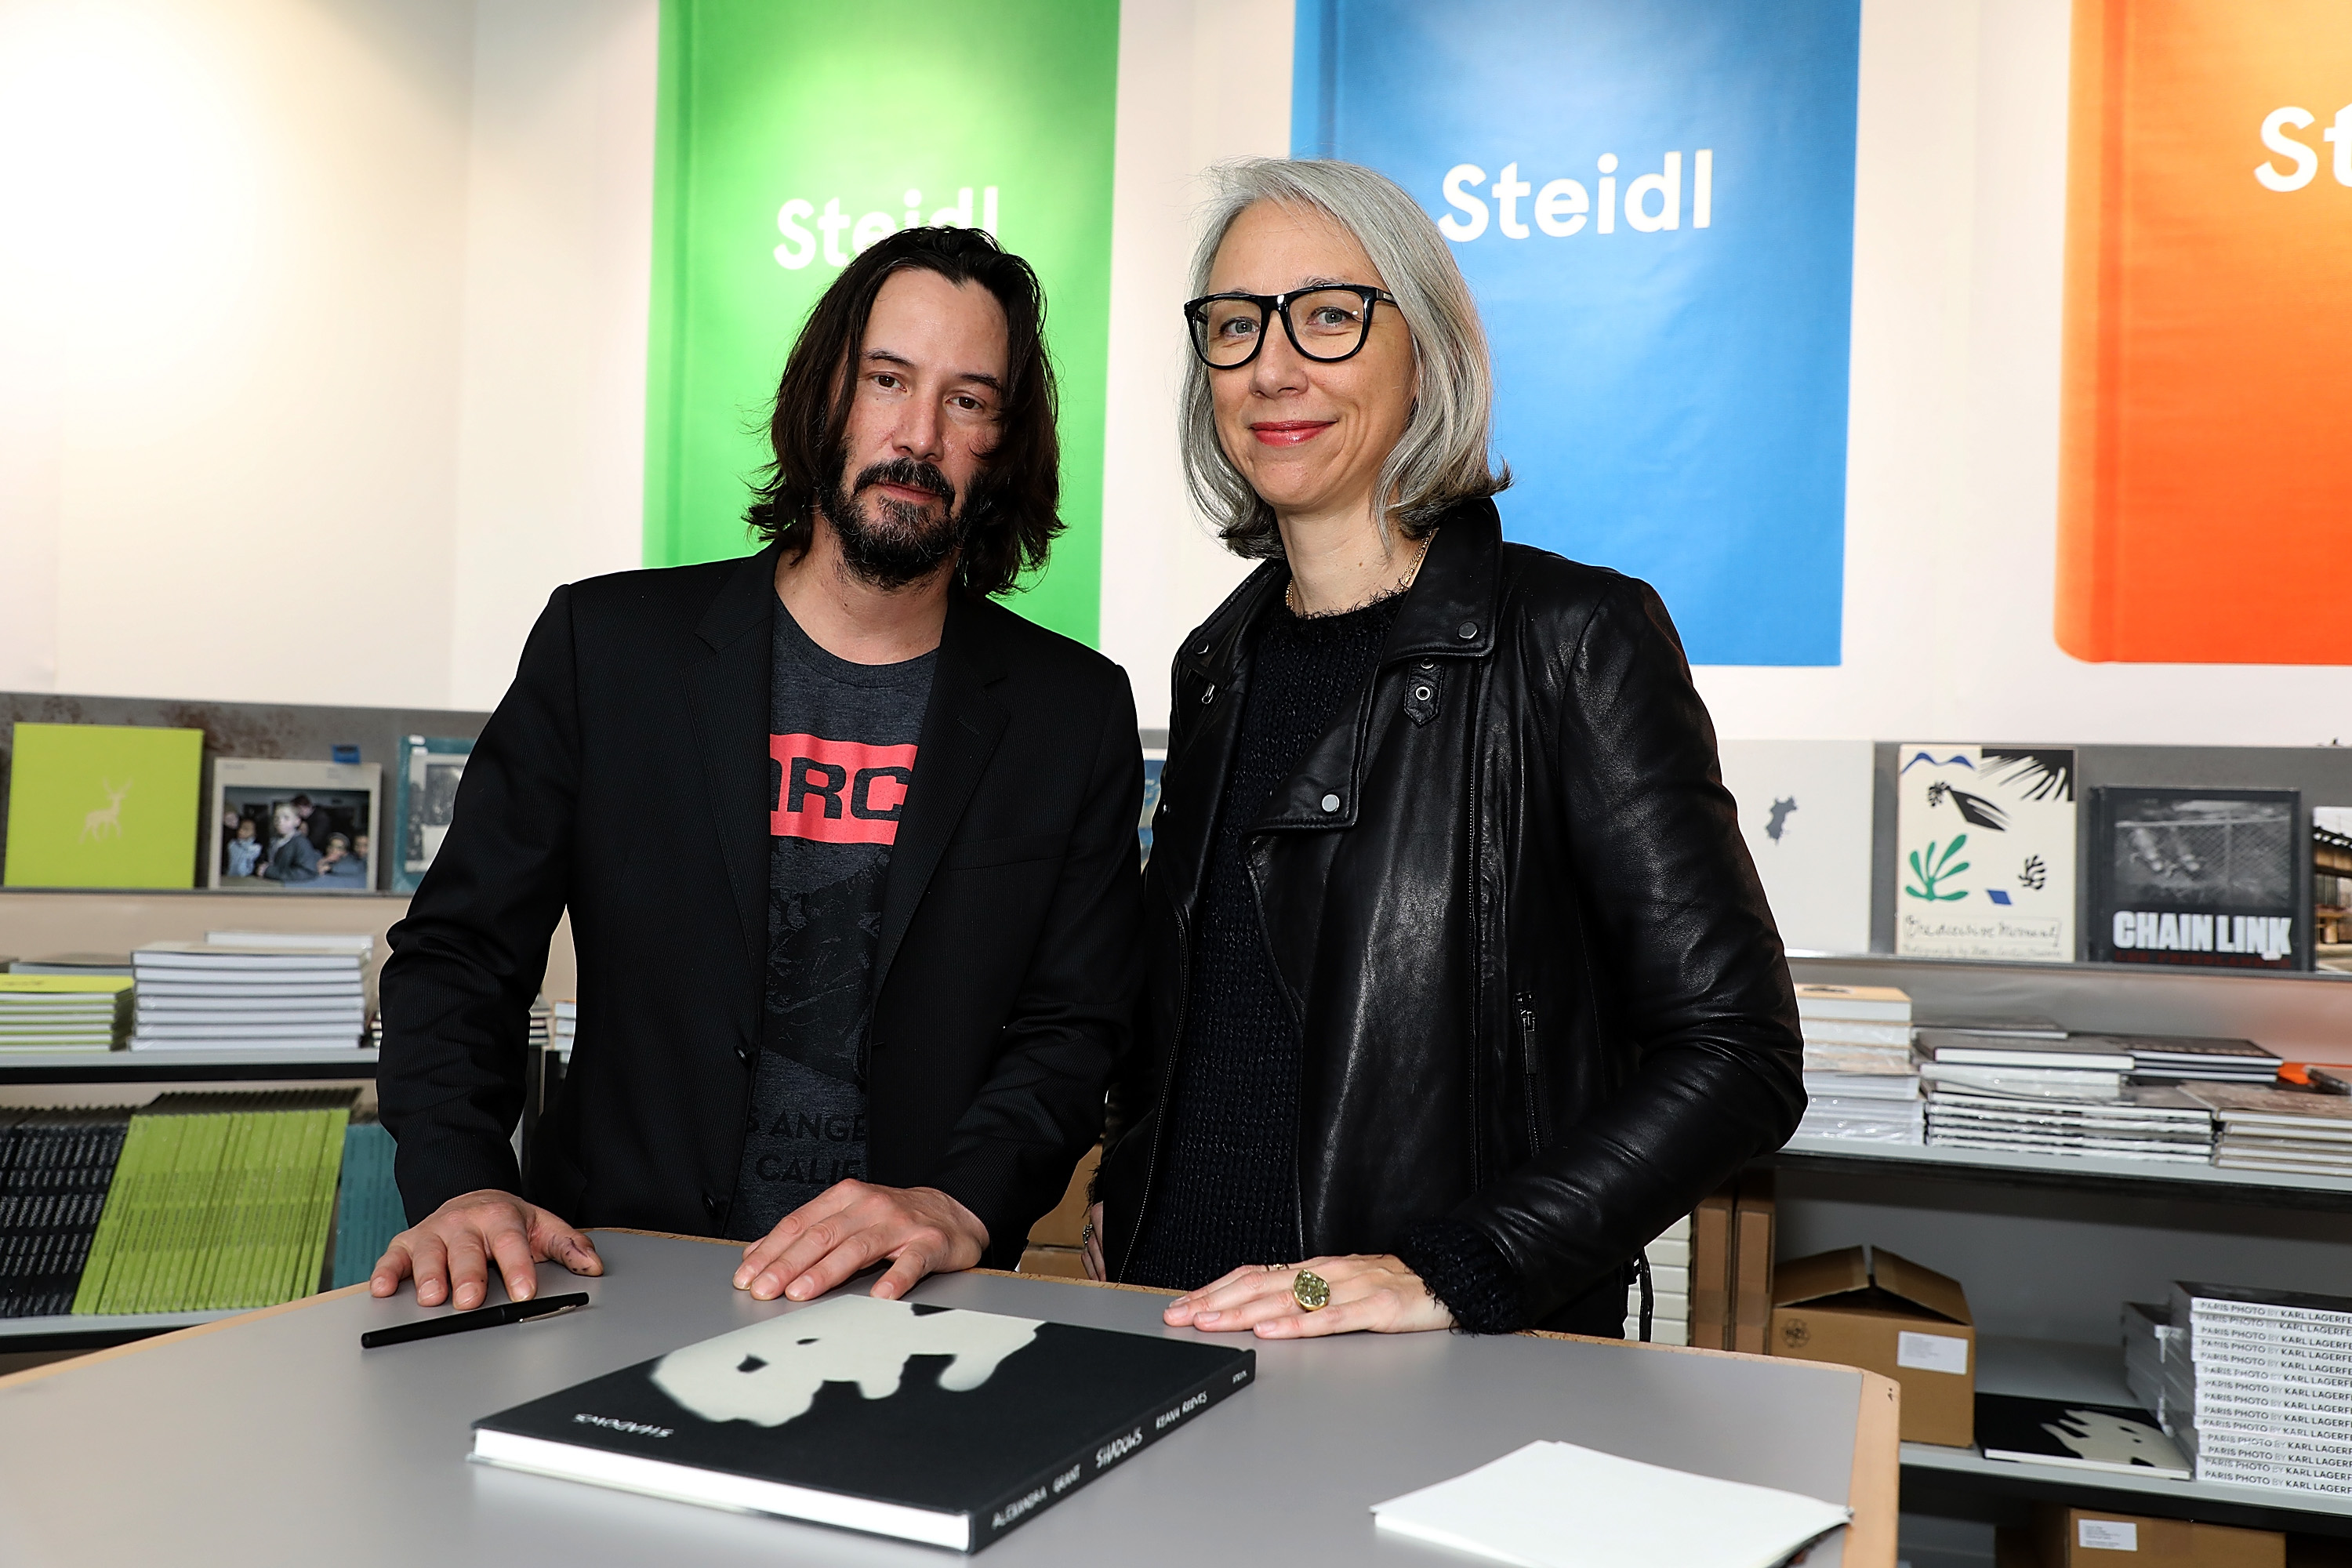 Keanu Reeves and Alexandra Grant posing by their book "Ode to happiness" in Paris in 2017 | Source: Getty Images